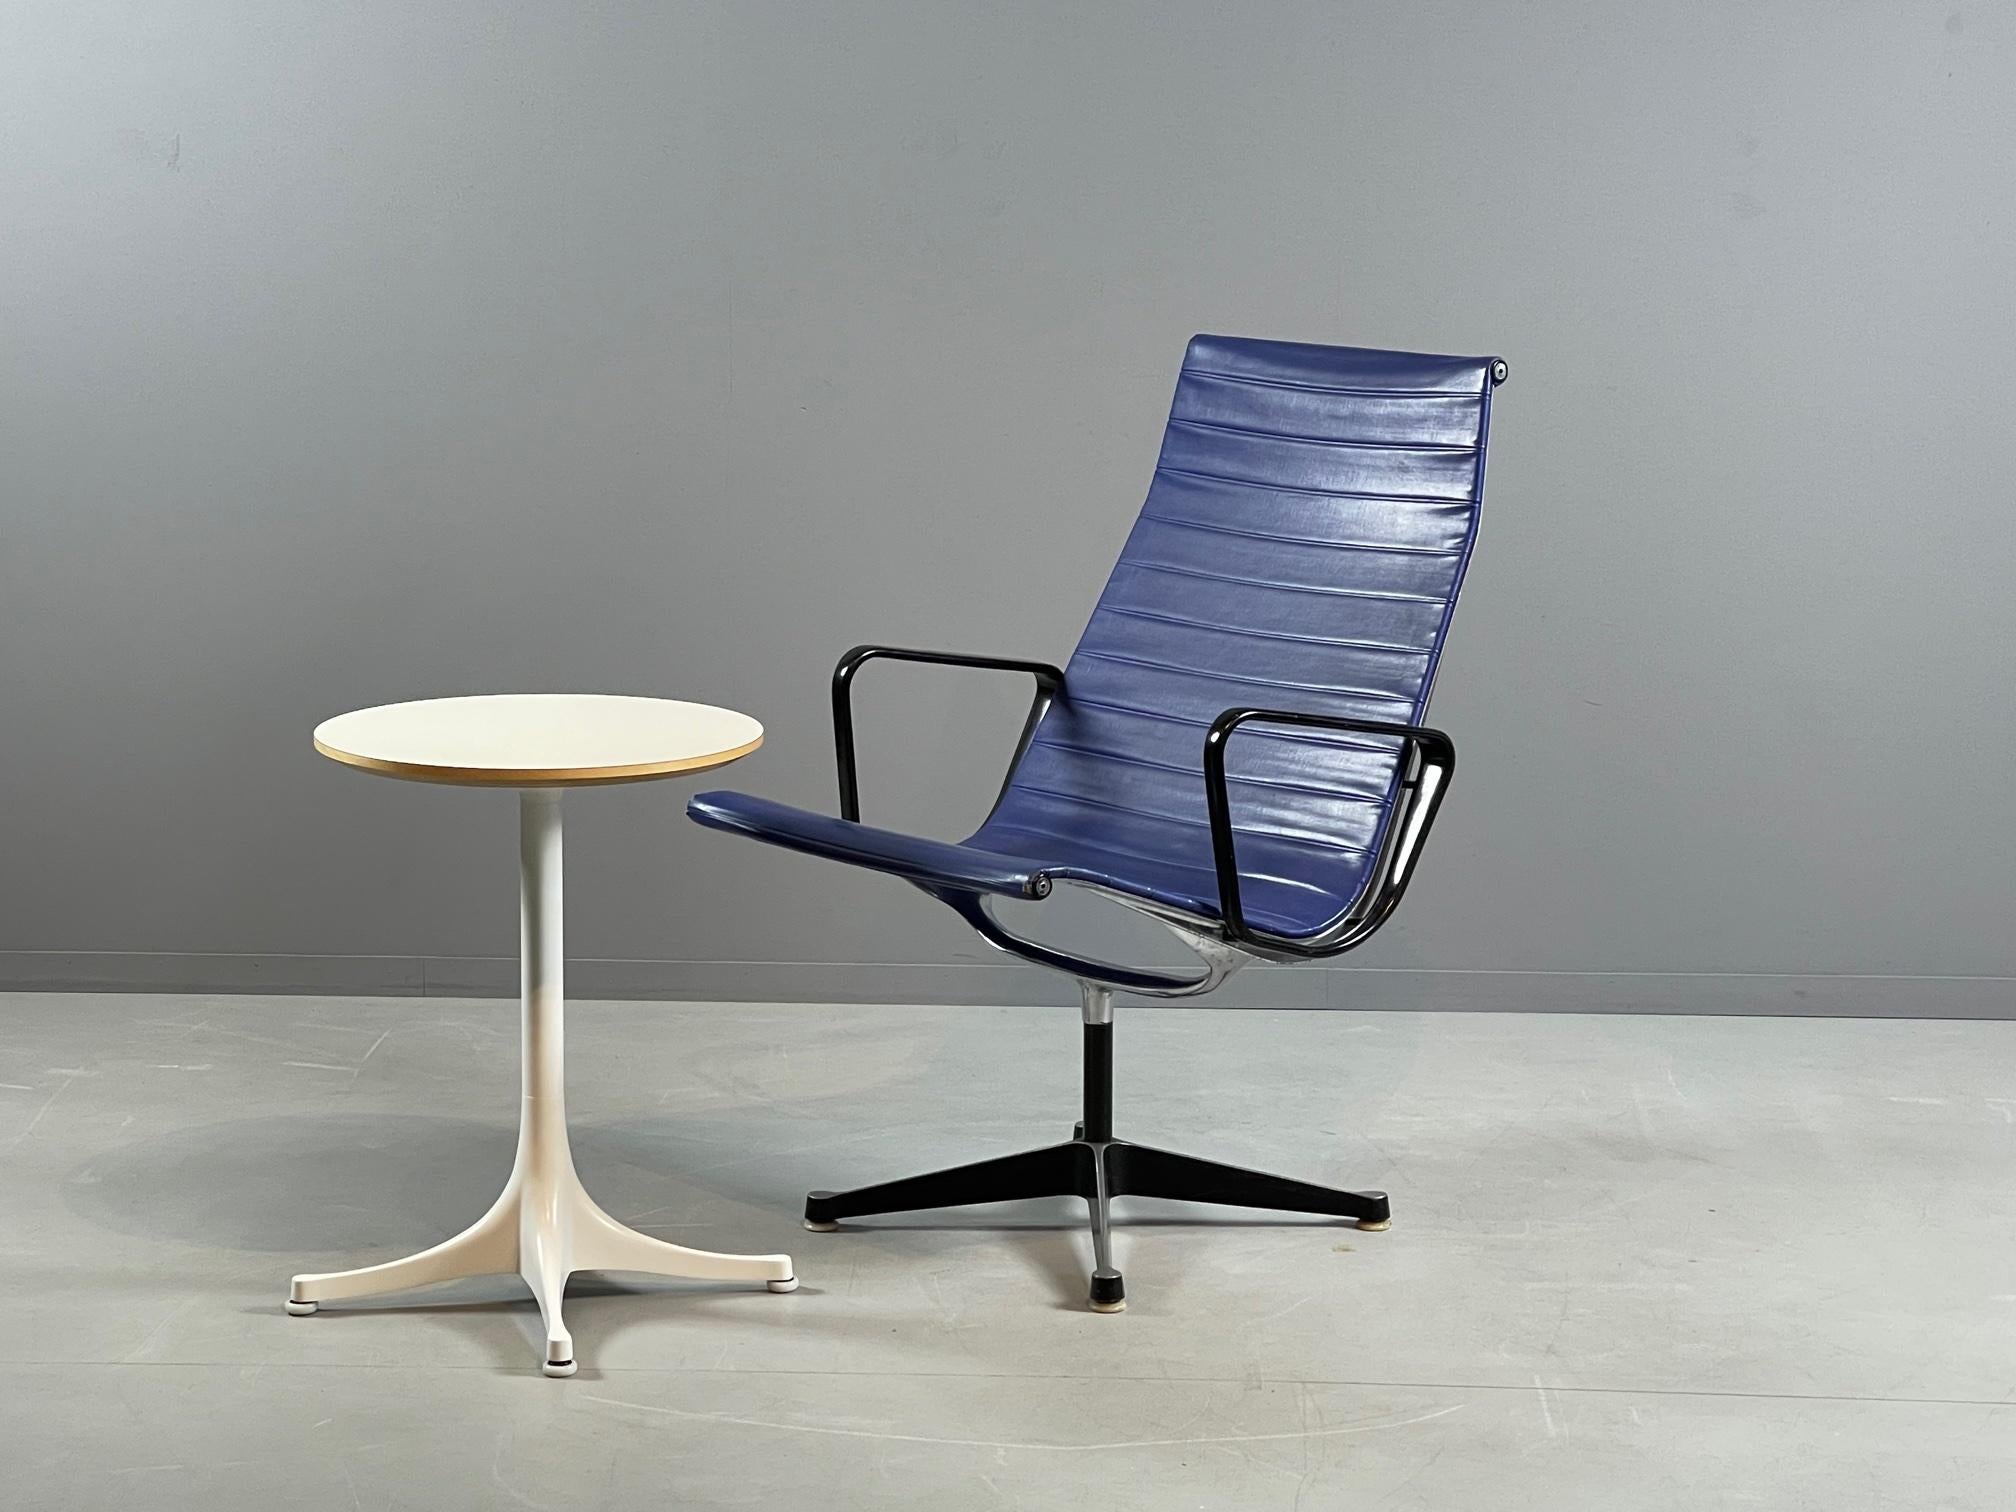 The two star designers meet at the end of the 30s and work from 1945 to the 70s in their joint studio on their legendary pieces of furniture.

This offer is about a well preserved lounge chair EA 116 in original blue vinyl from the Herman Miller